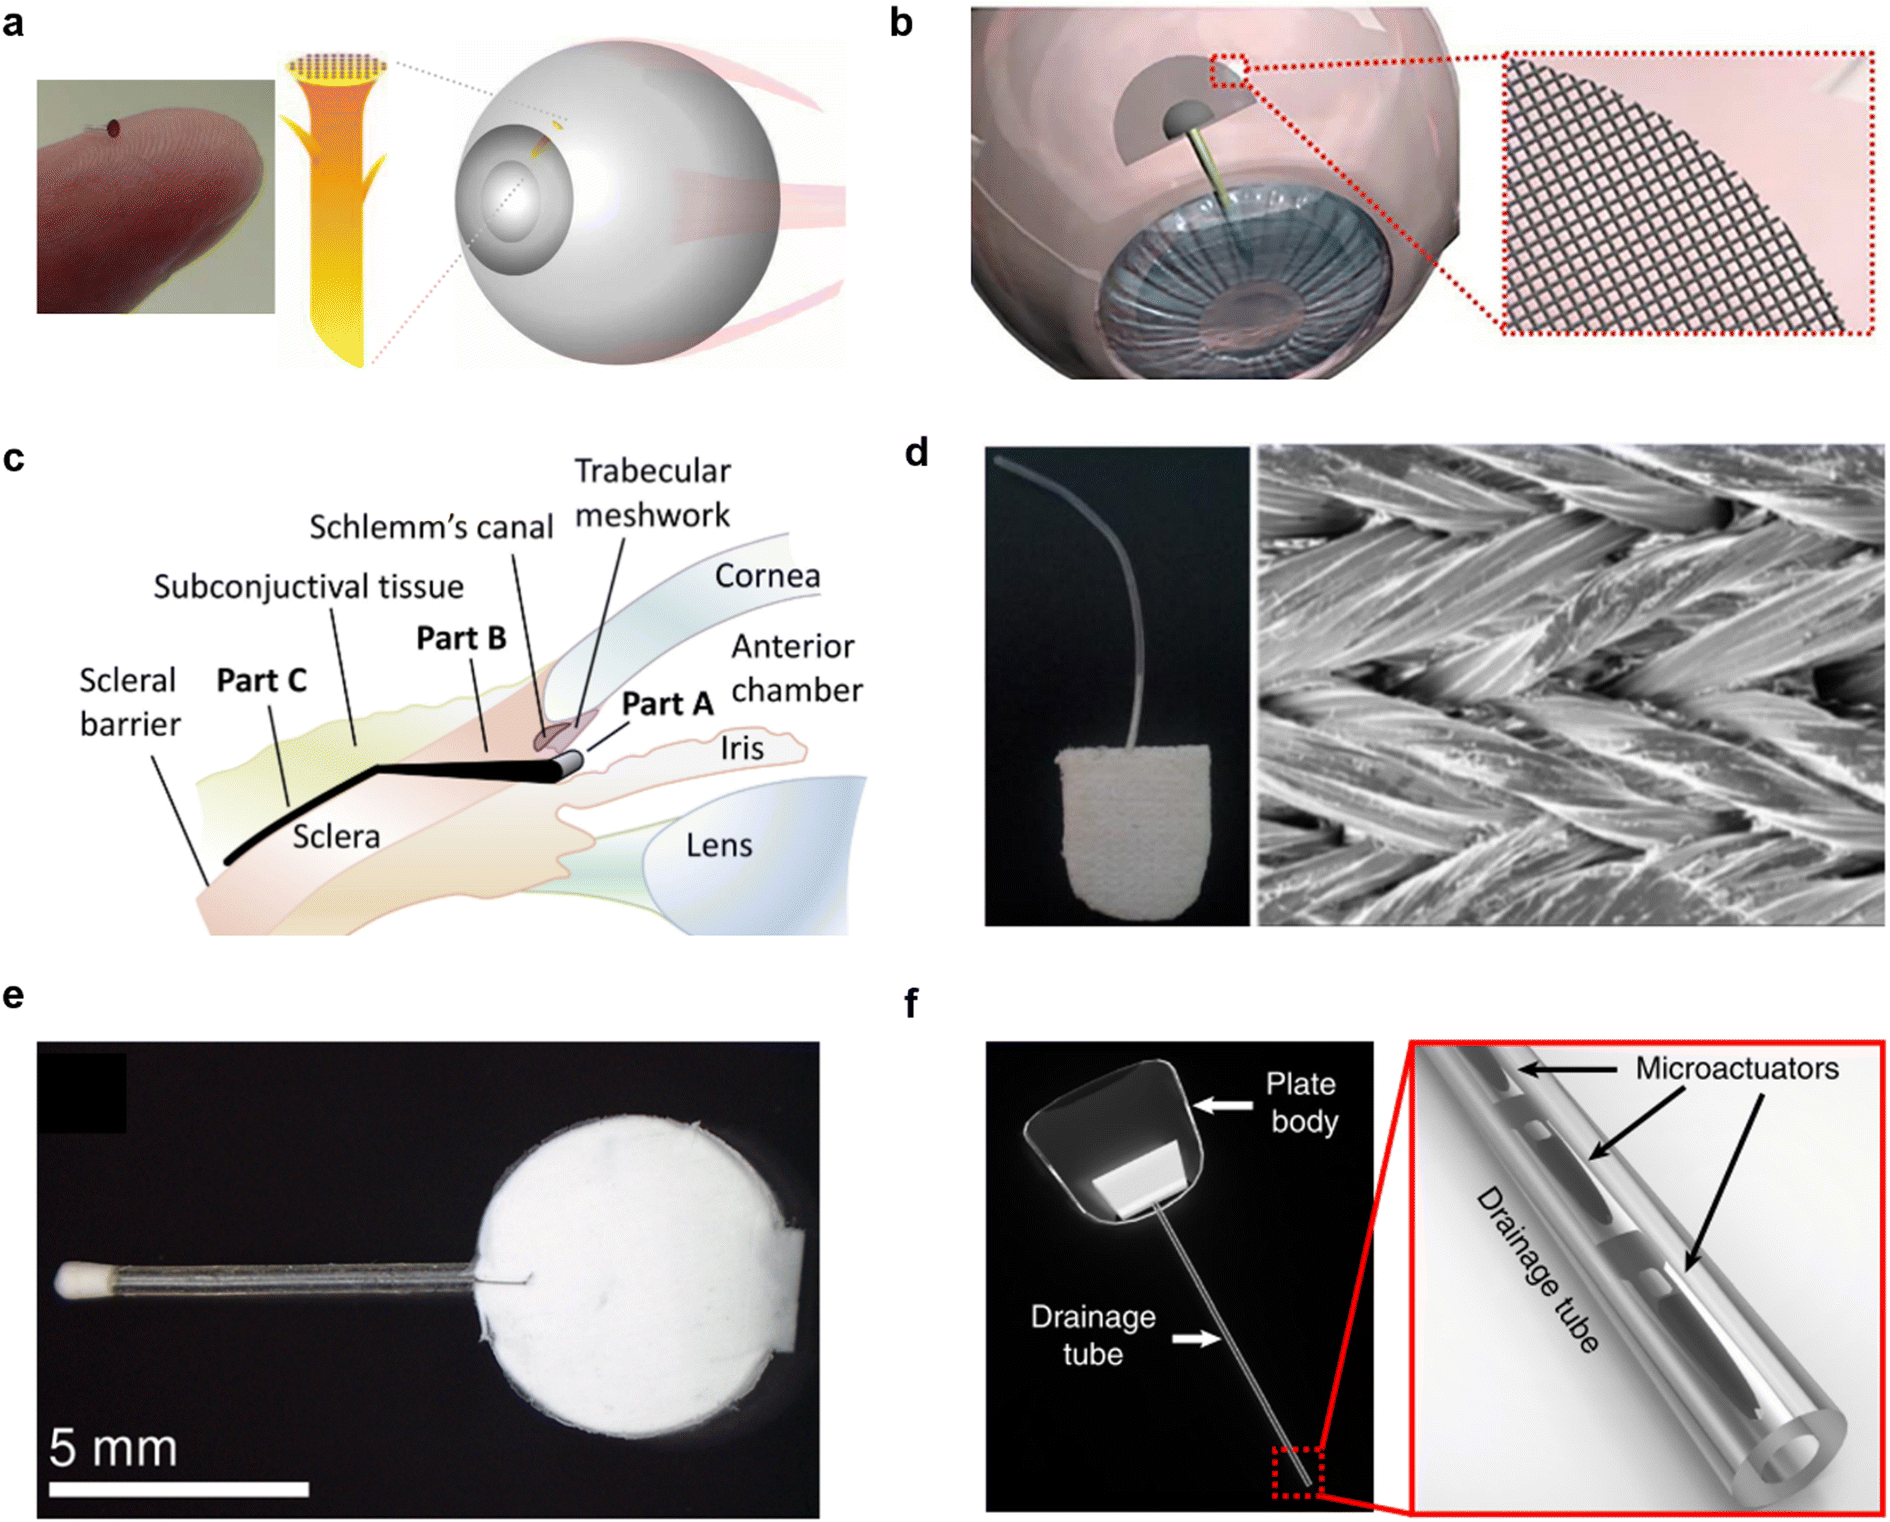 Microfluidics in the eye: a review of glaucoma implants from an